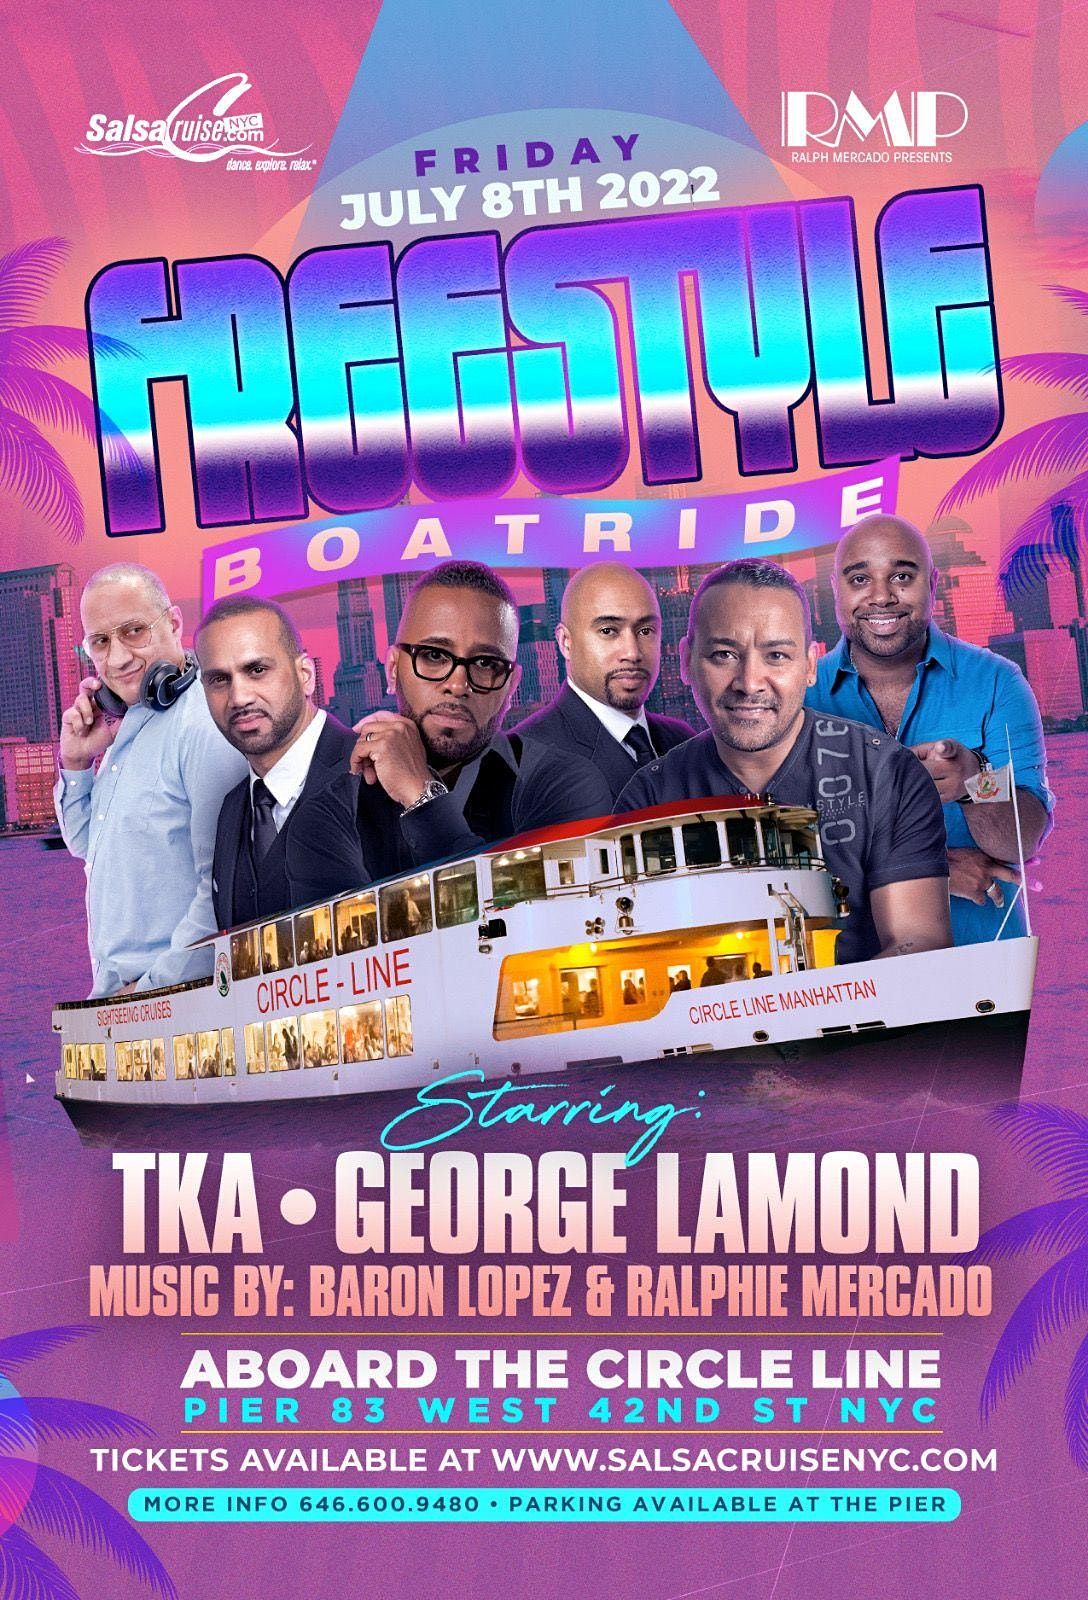 Friday, July 8, 2022 FreeStyle Boat Ride